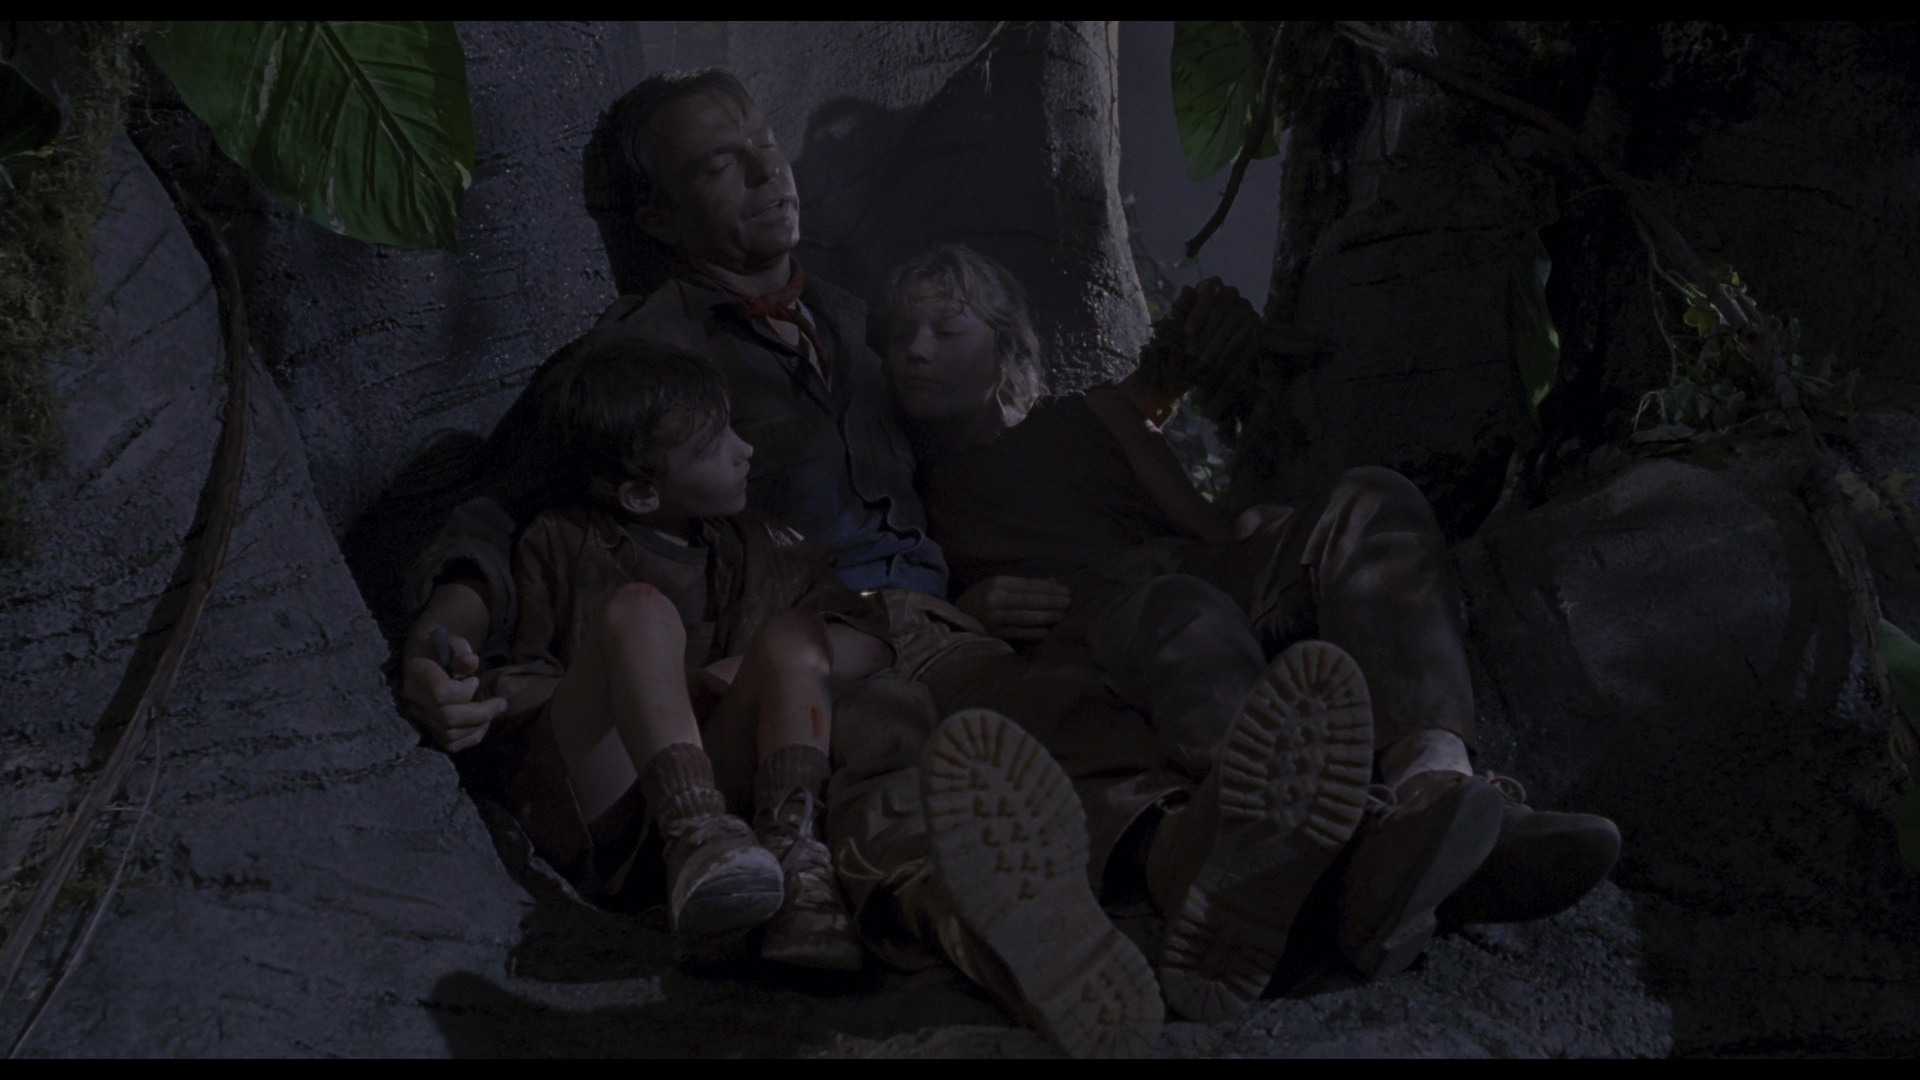 JURASSIC PARK (1993) - Dr. Alan Grant's (Sam Neill) Boots - Image 7 of 12